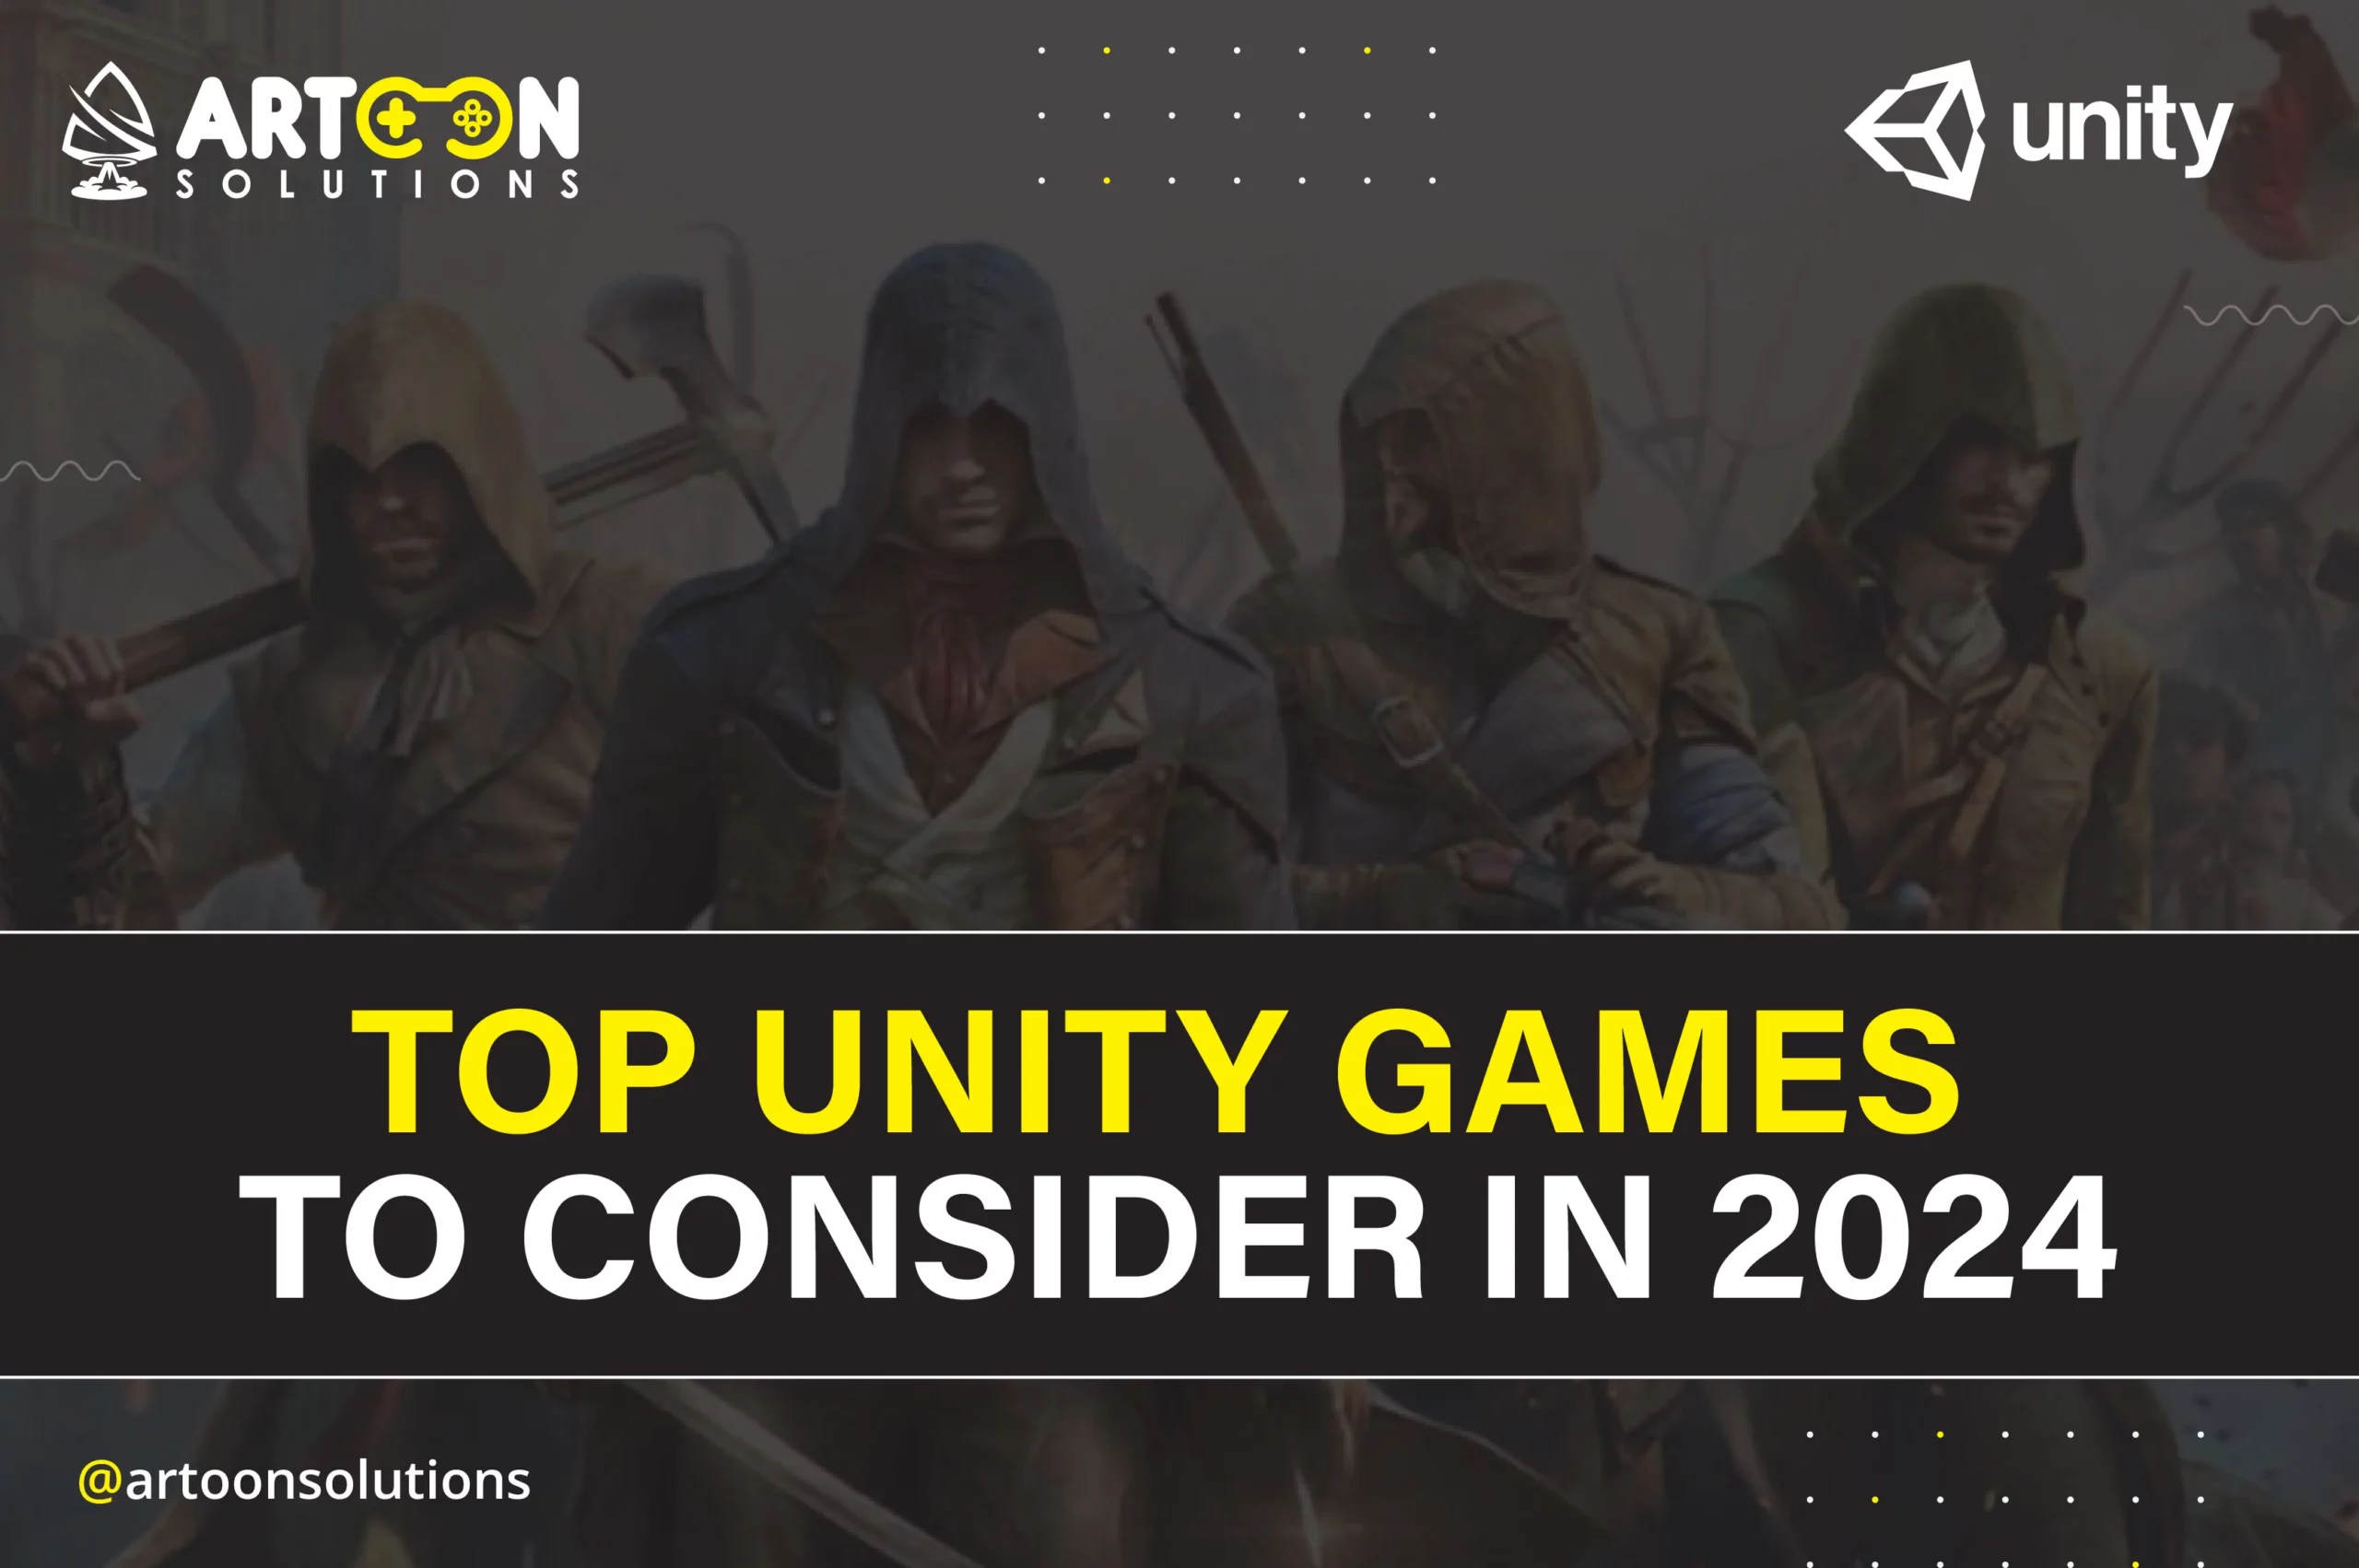 Top Unity Games To Consider in 2024